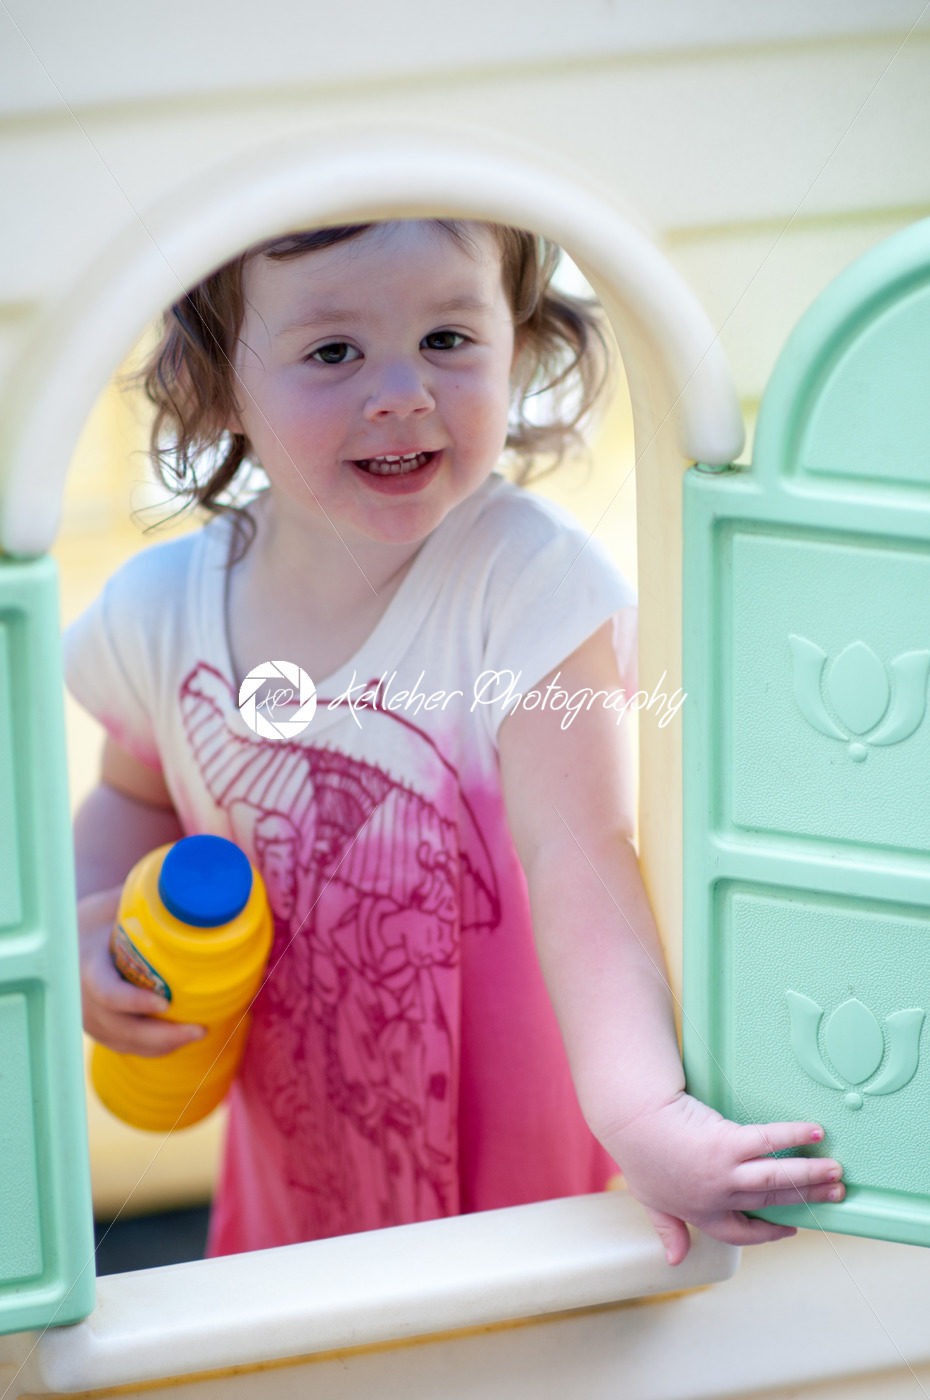 Young little girl playing in toy house in backyard on a sunny day - Kelleher Photography Store